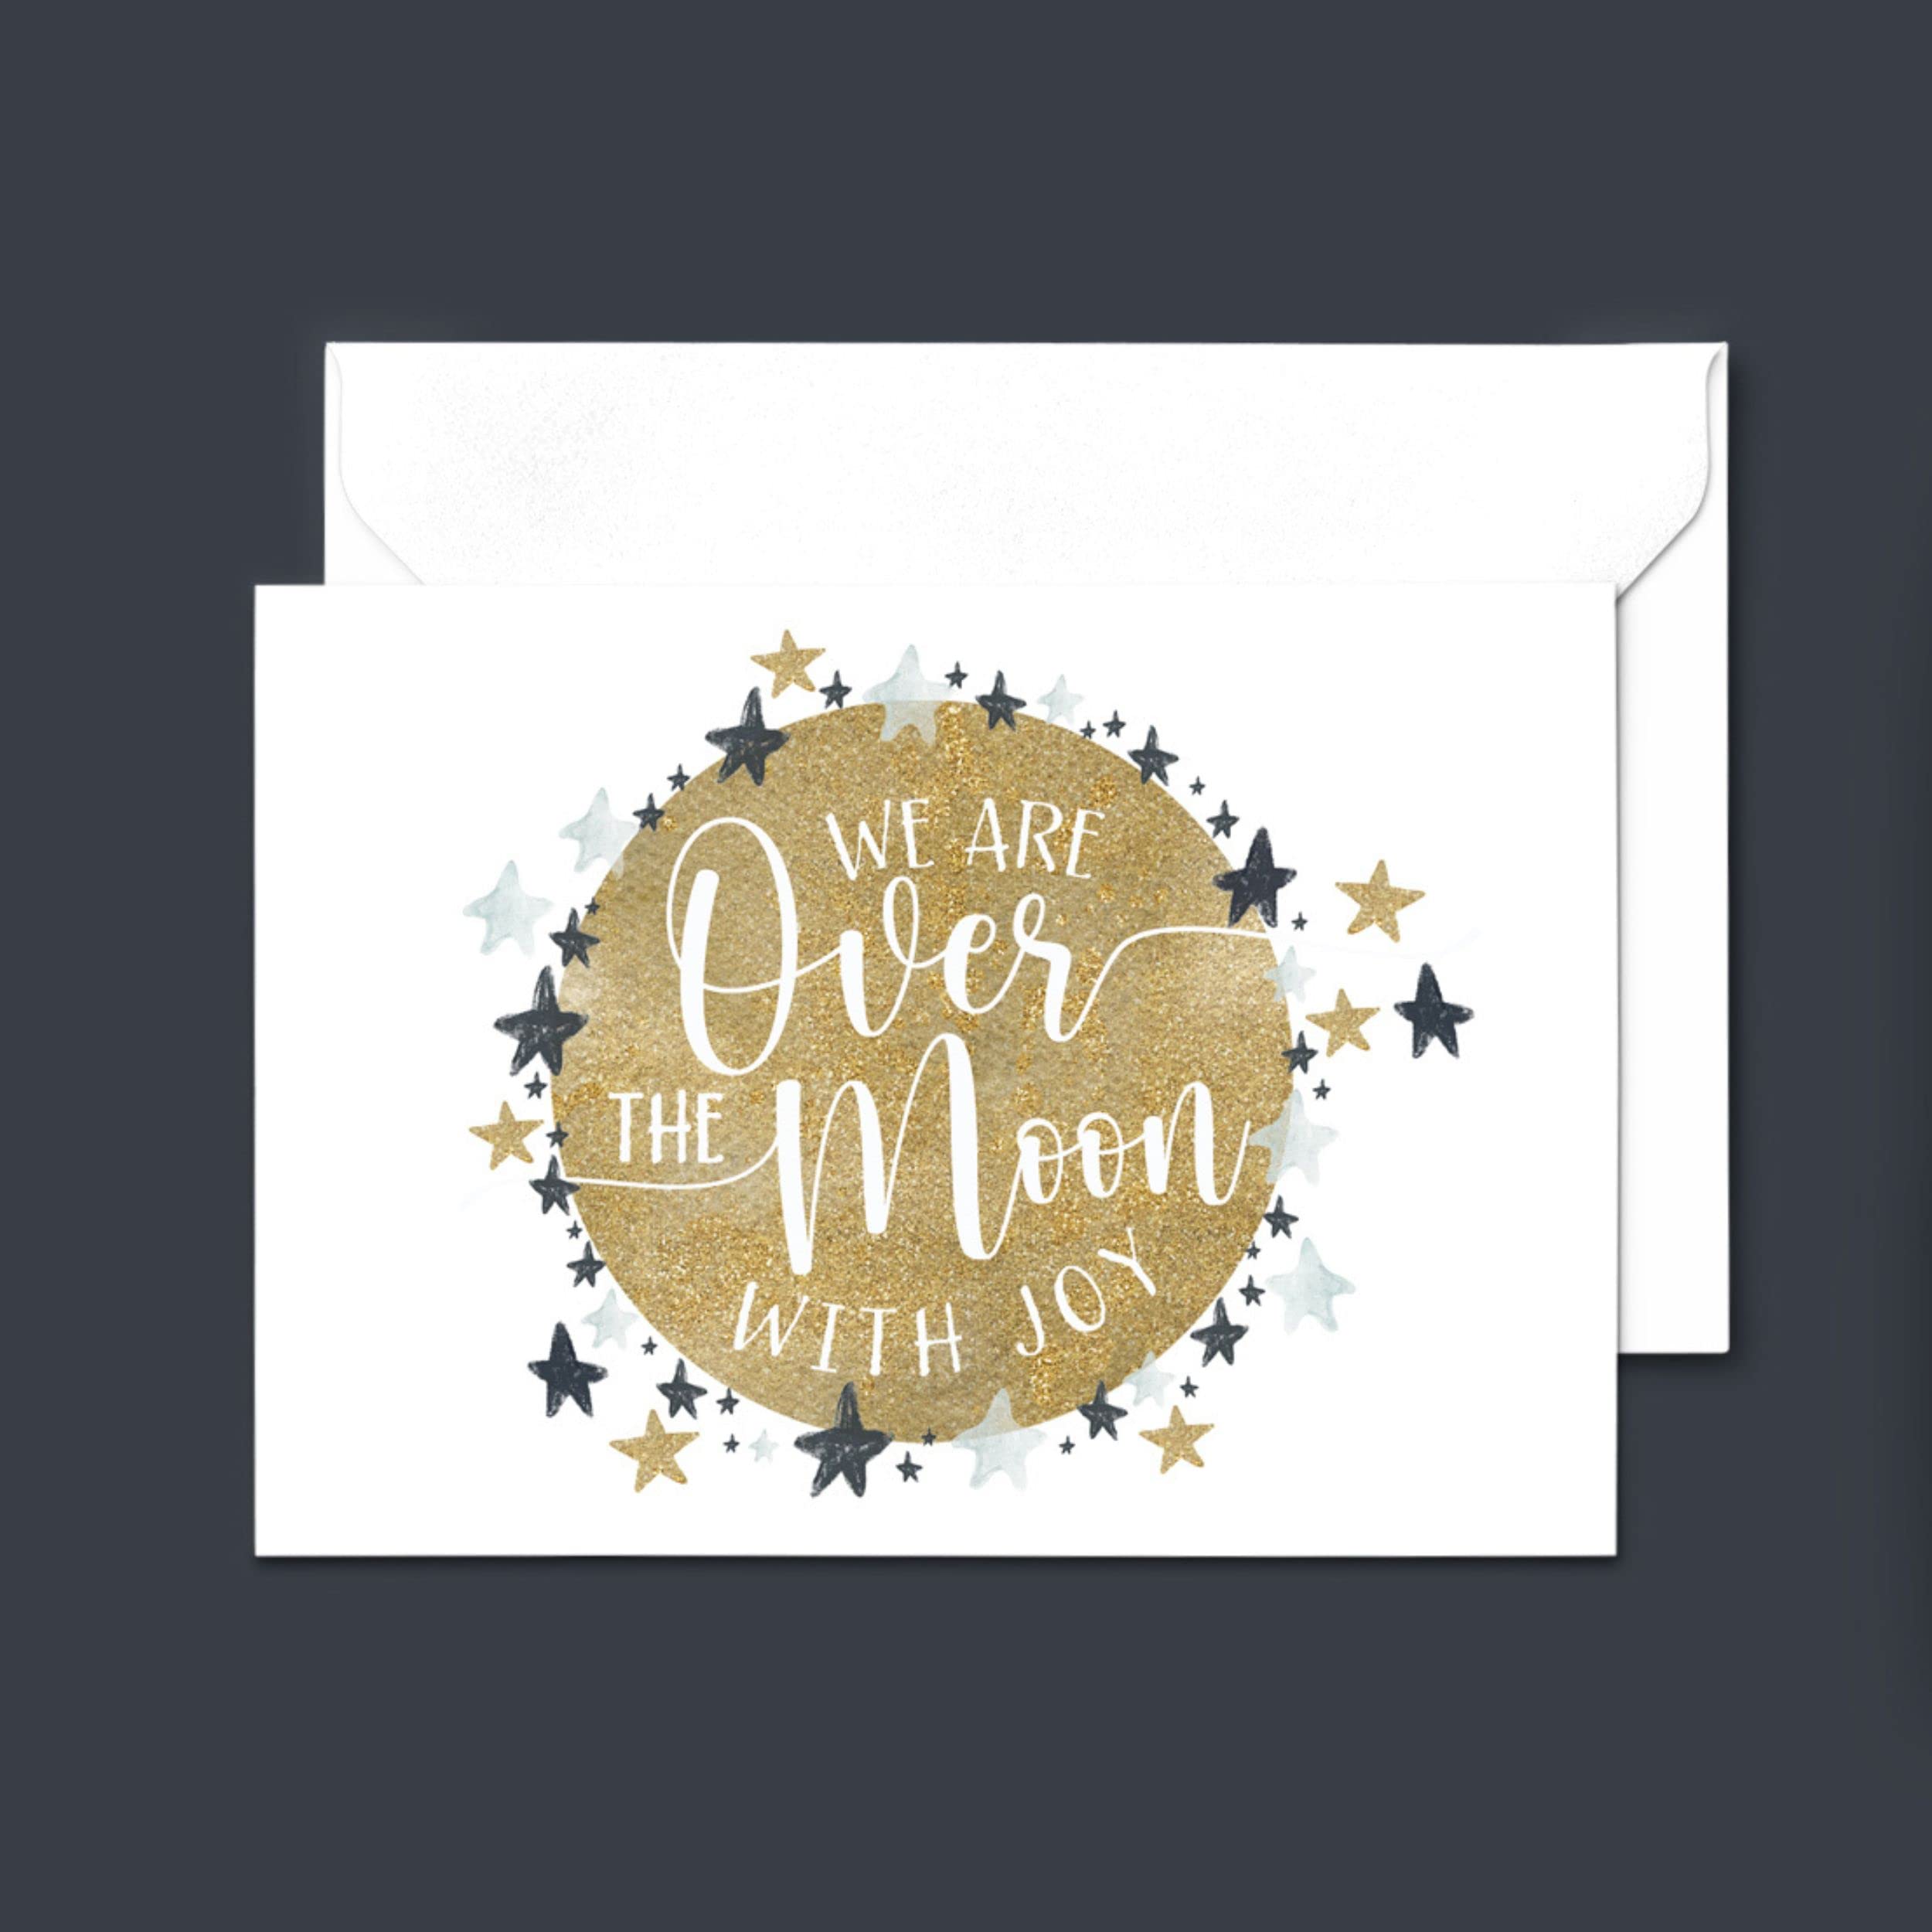 Over the Moon Thank You Cards (25 Count) All Occasion Notecards with Envelopes – Individual Note of Thanks From Boys Baby Shower, Wedding, Party, Everyday – Celestial Star Theme – Folded 4bar Set